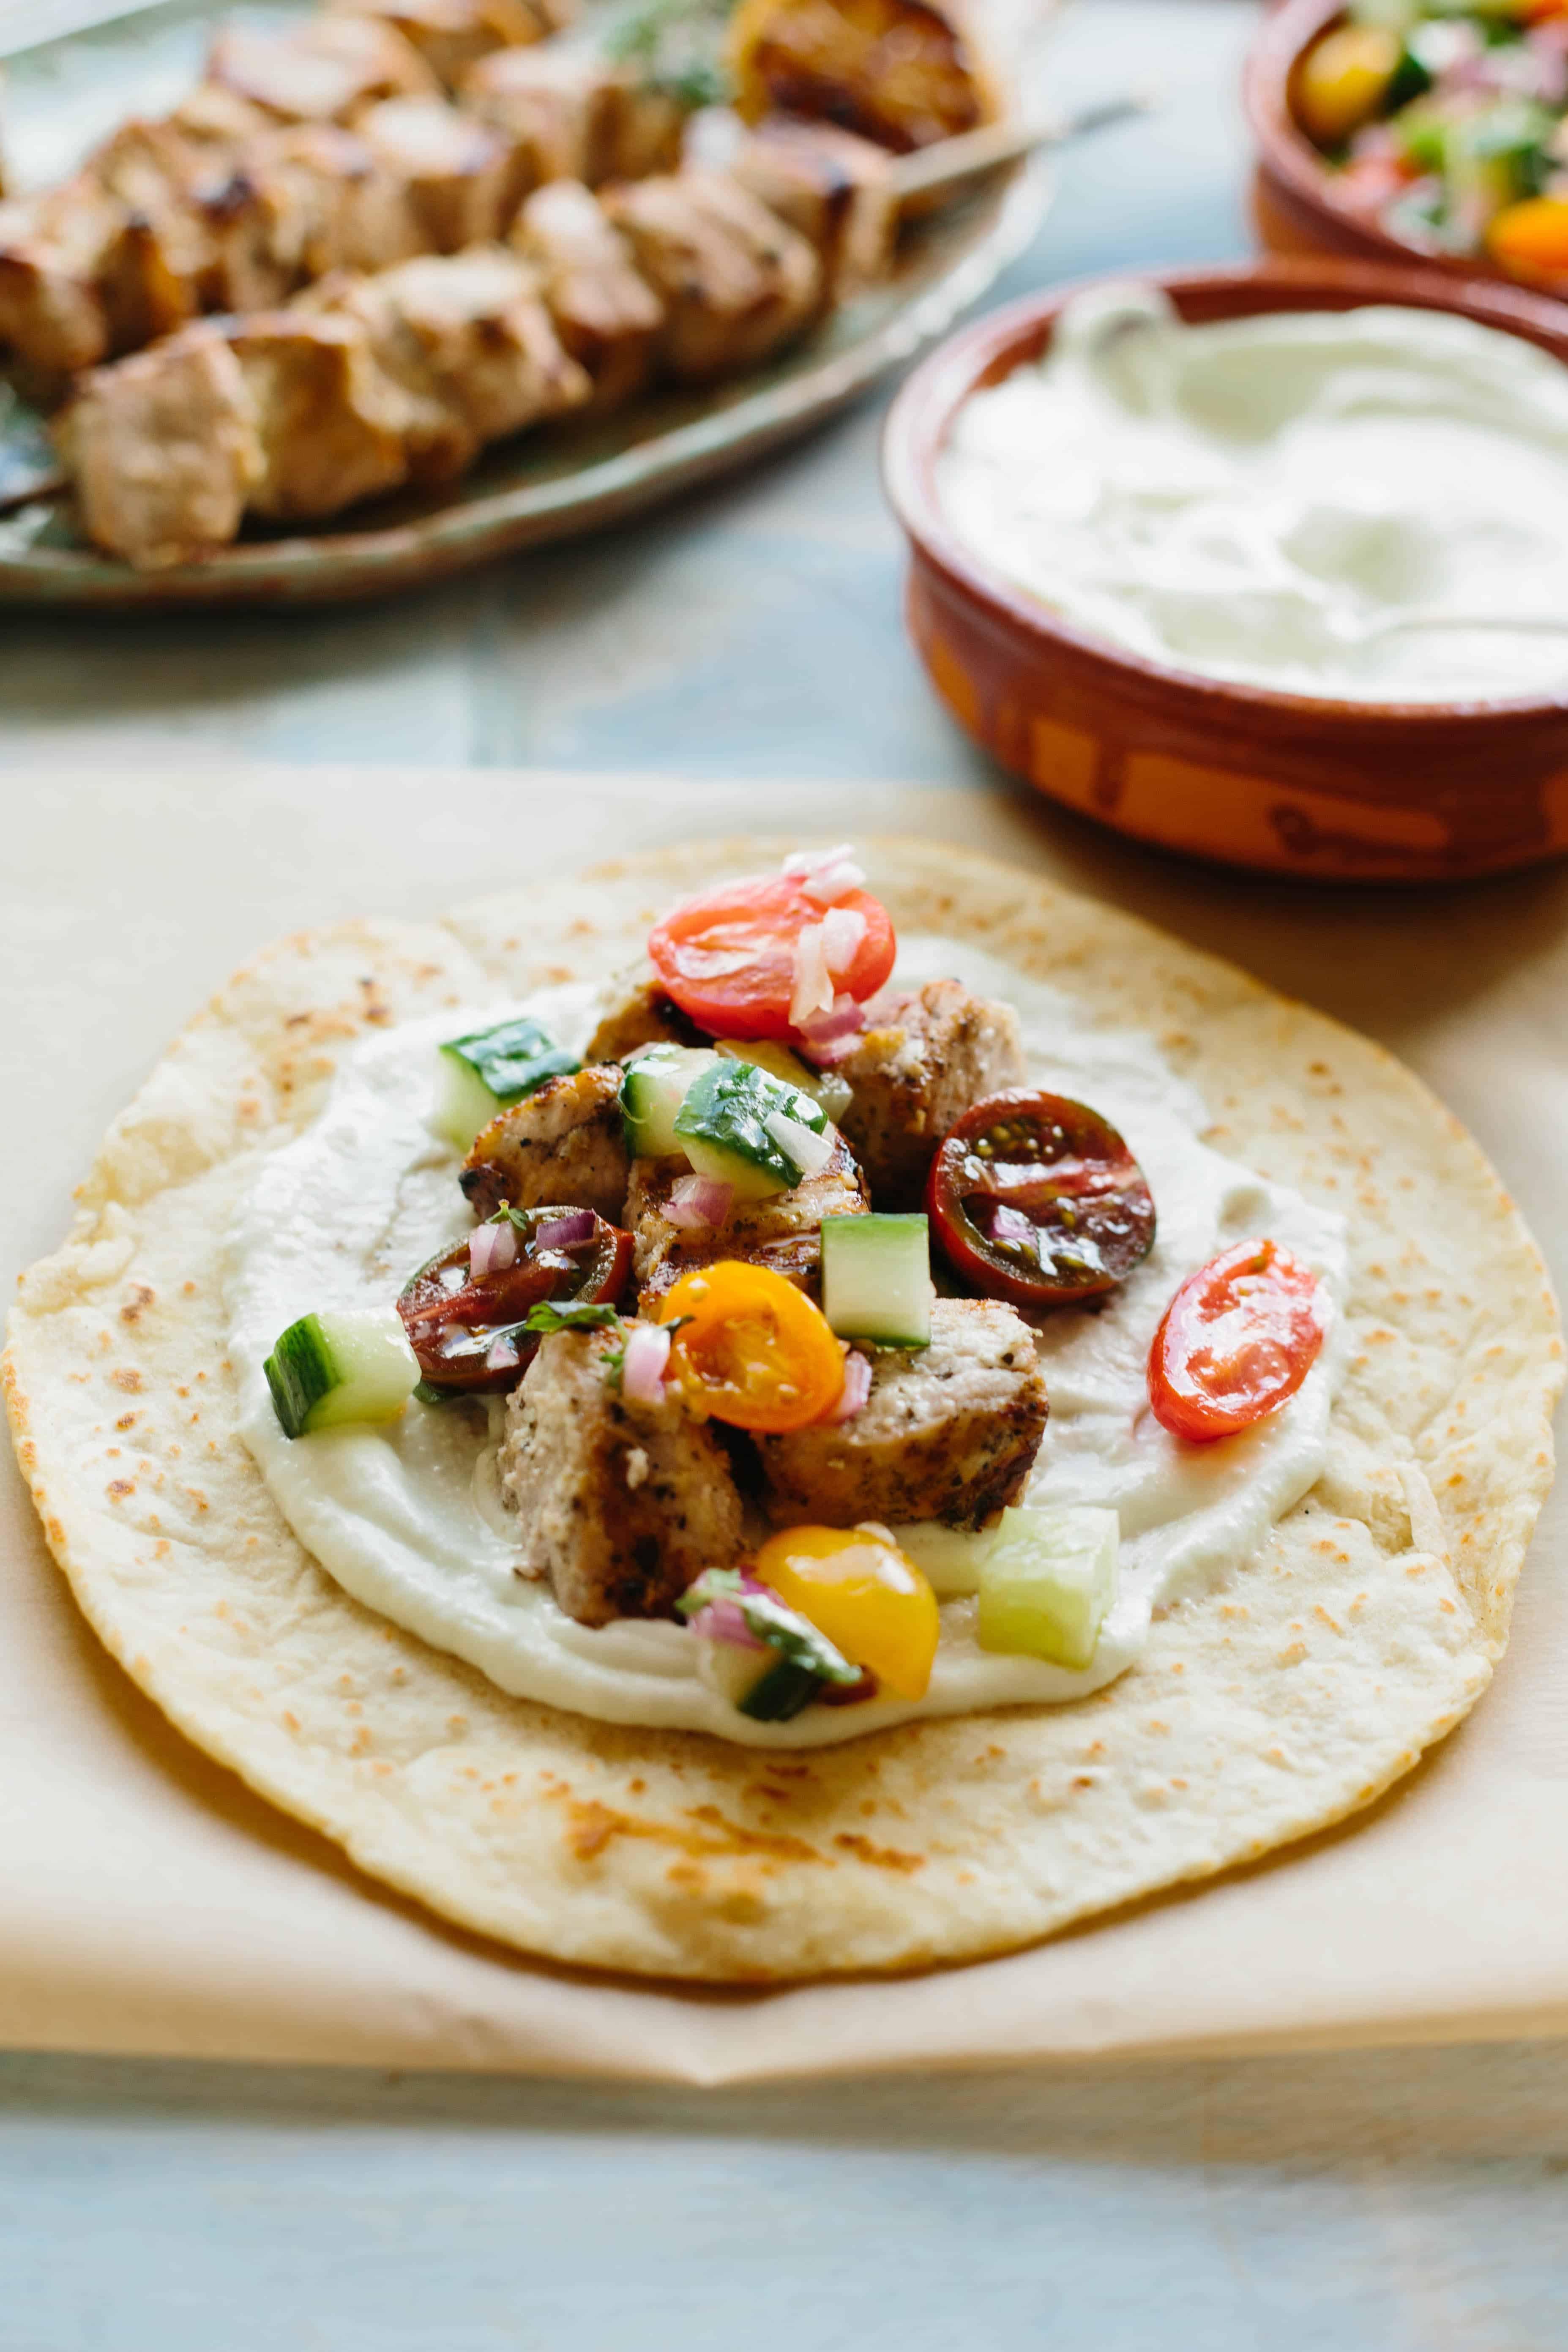 A pita topped with garlic sauce, grilled pork, and fresh tomato cucumber salad.